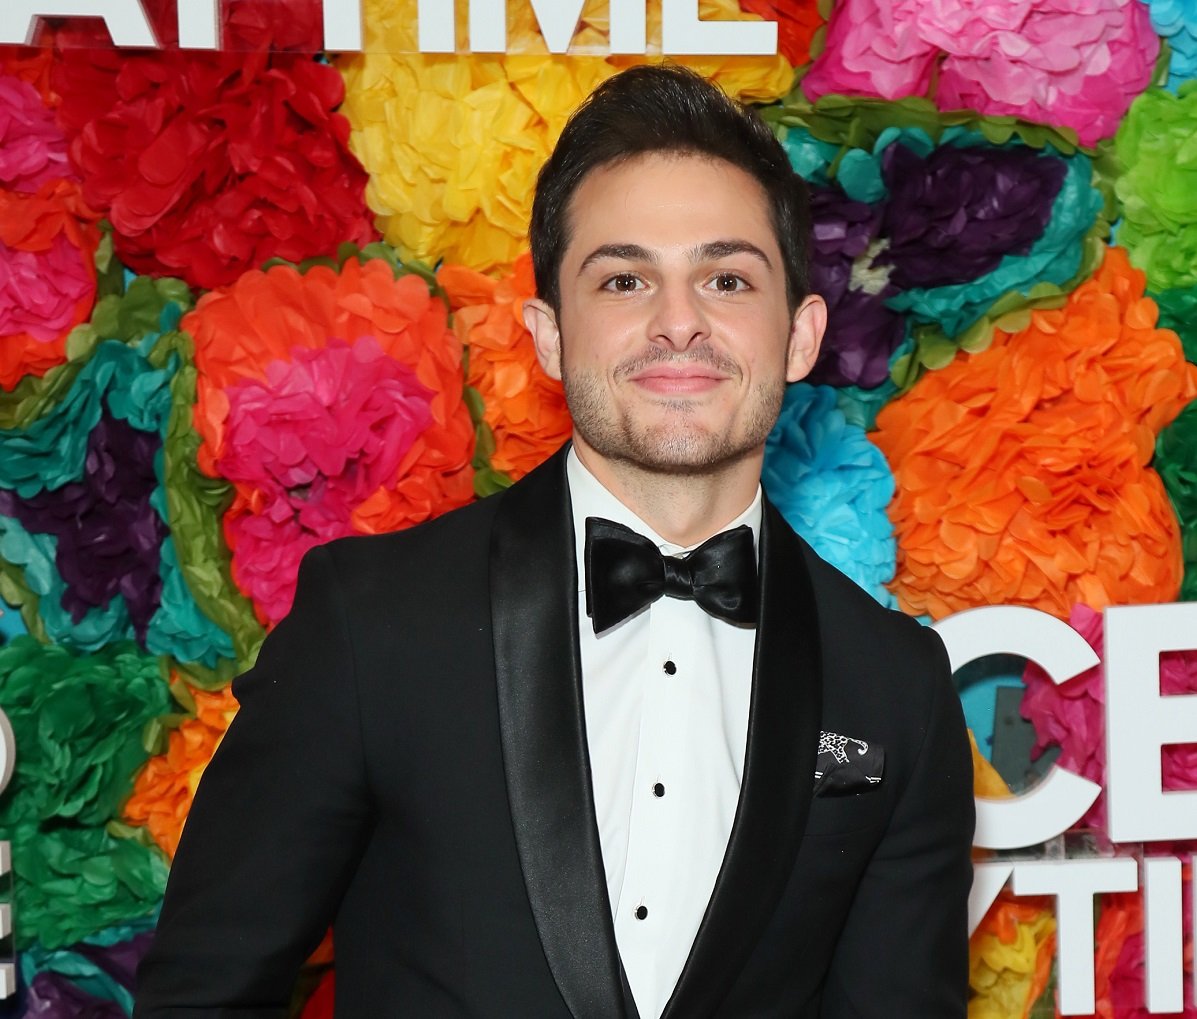 'The Young and the Restless' star Zach Tinker in a tuxedo; poses in front of a floral hedge.